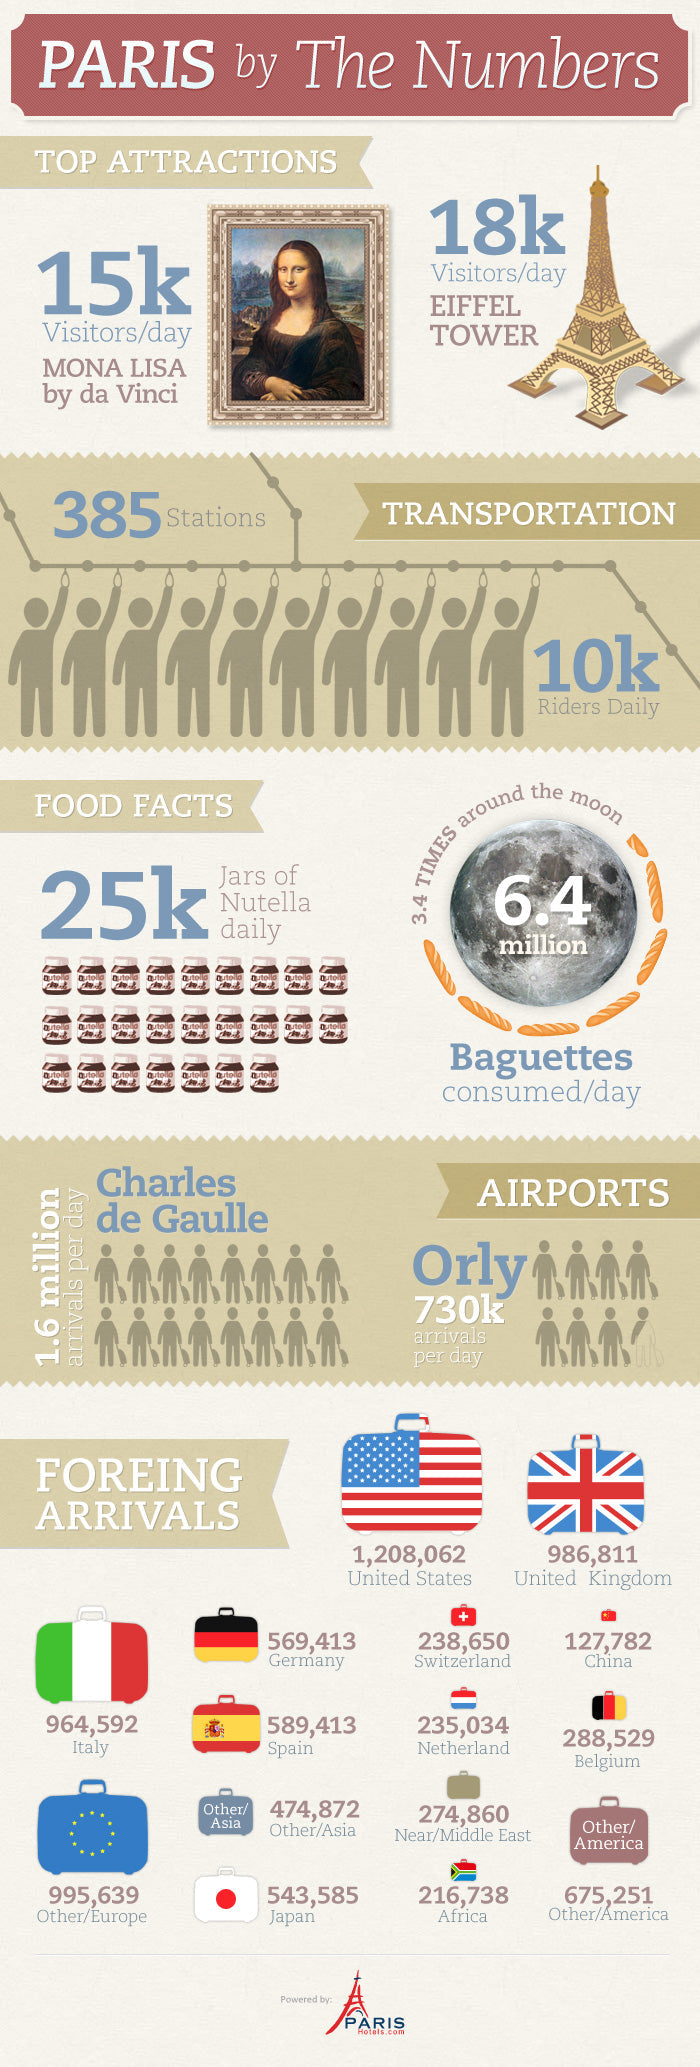 Paris by the numbers !